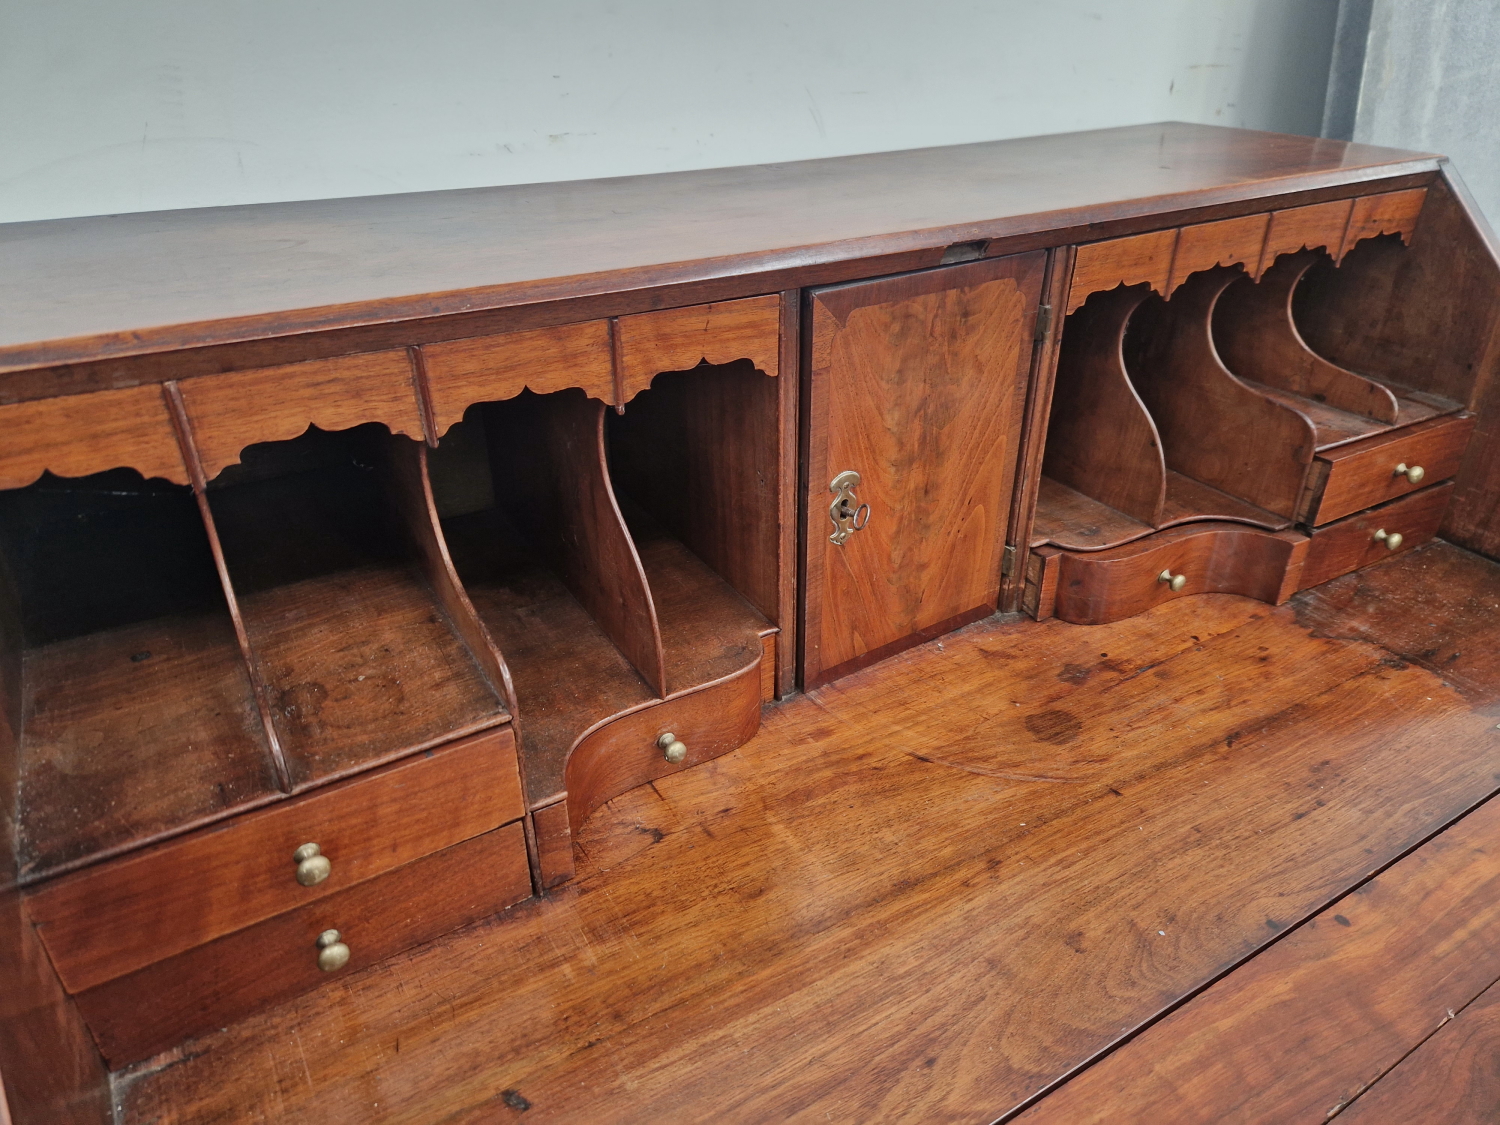 A GEORGE III FRUIT WOOD BUREAU, THE FALL ABOVE FOUR GRADED DRAWERS - Image 4 of 6